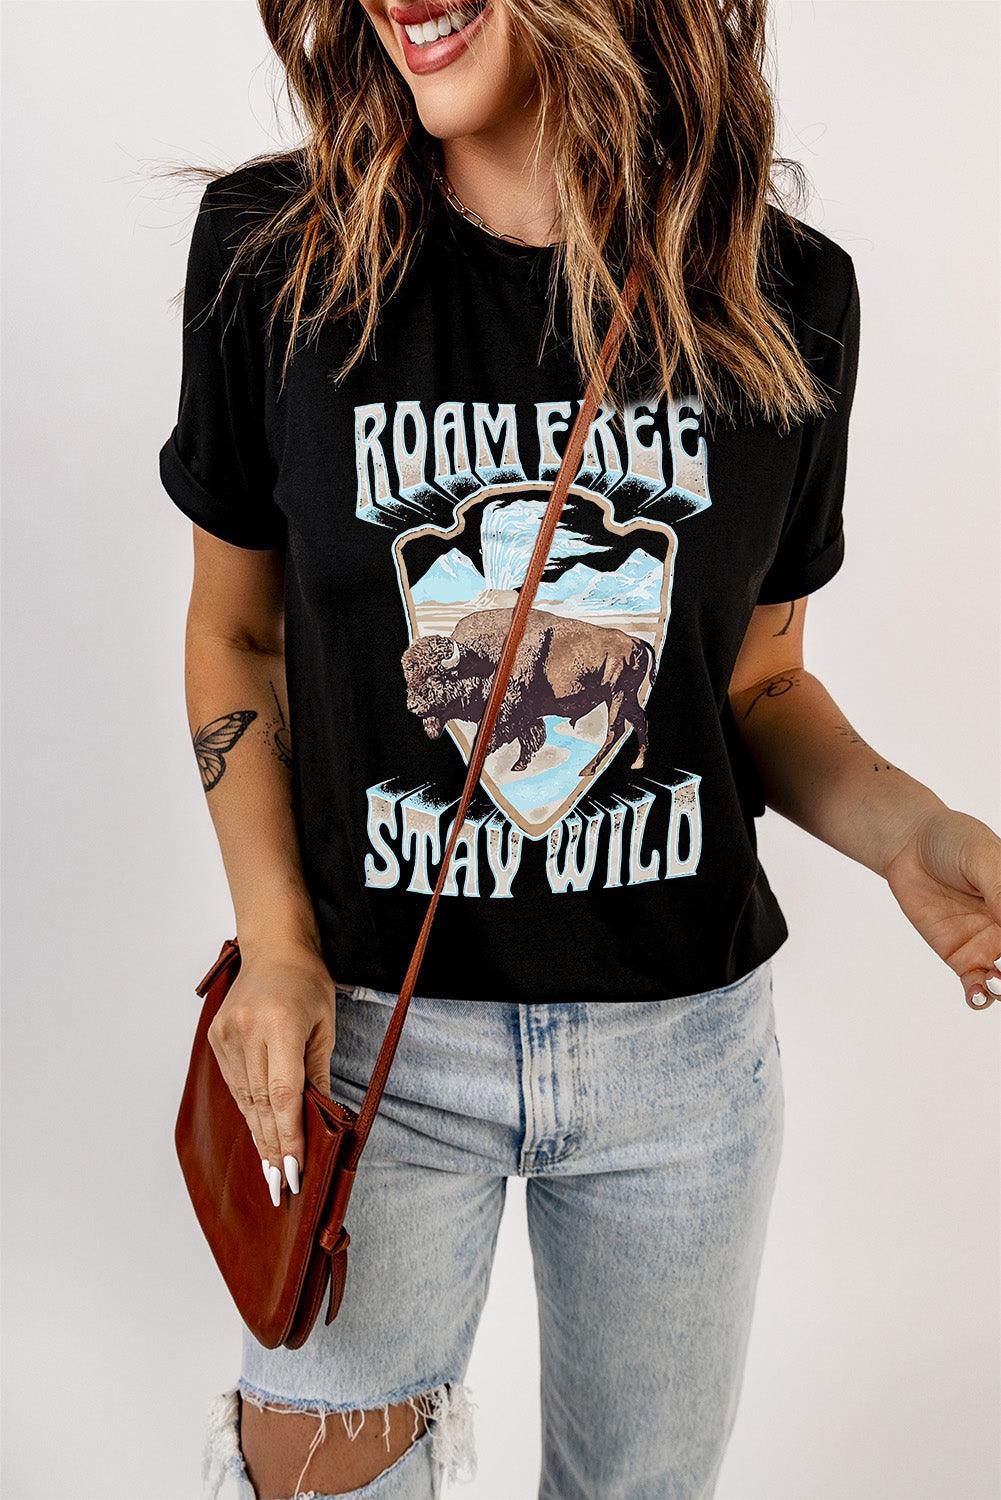 ROAM FREE STAY WILD Graphic Tee - Lucianne Boutique